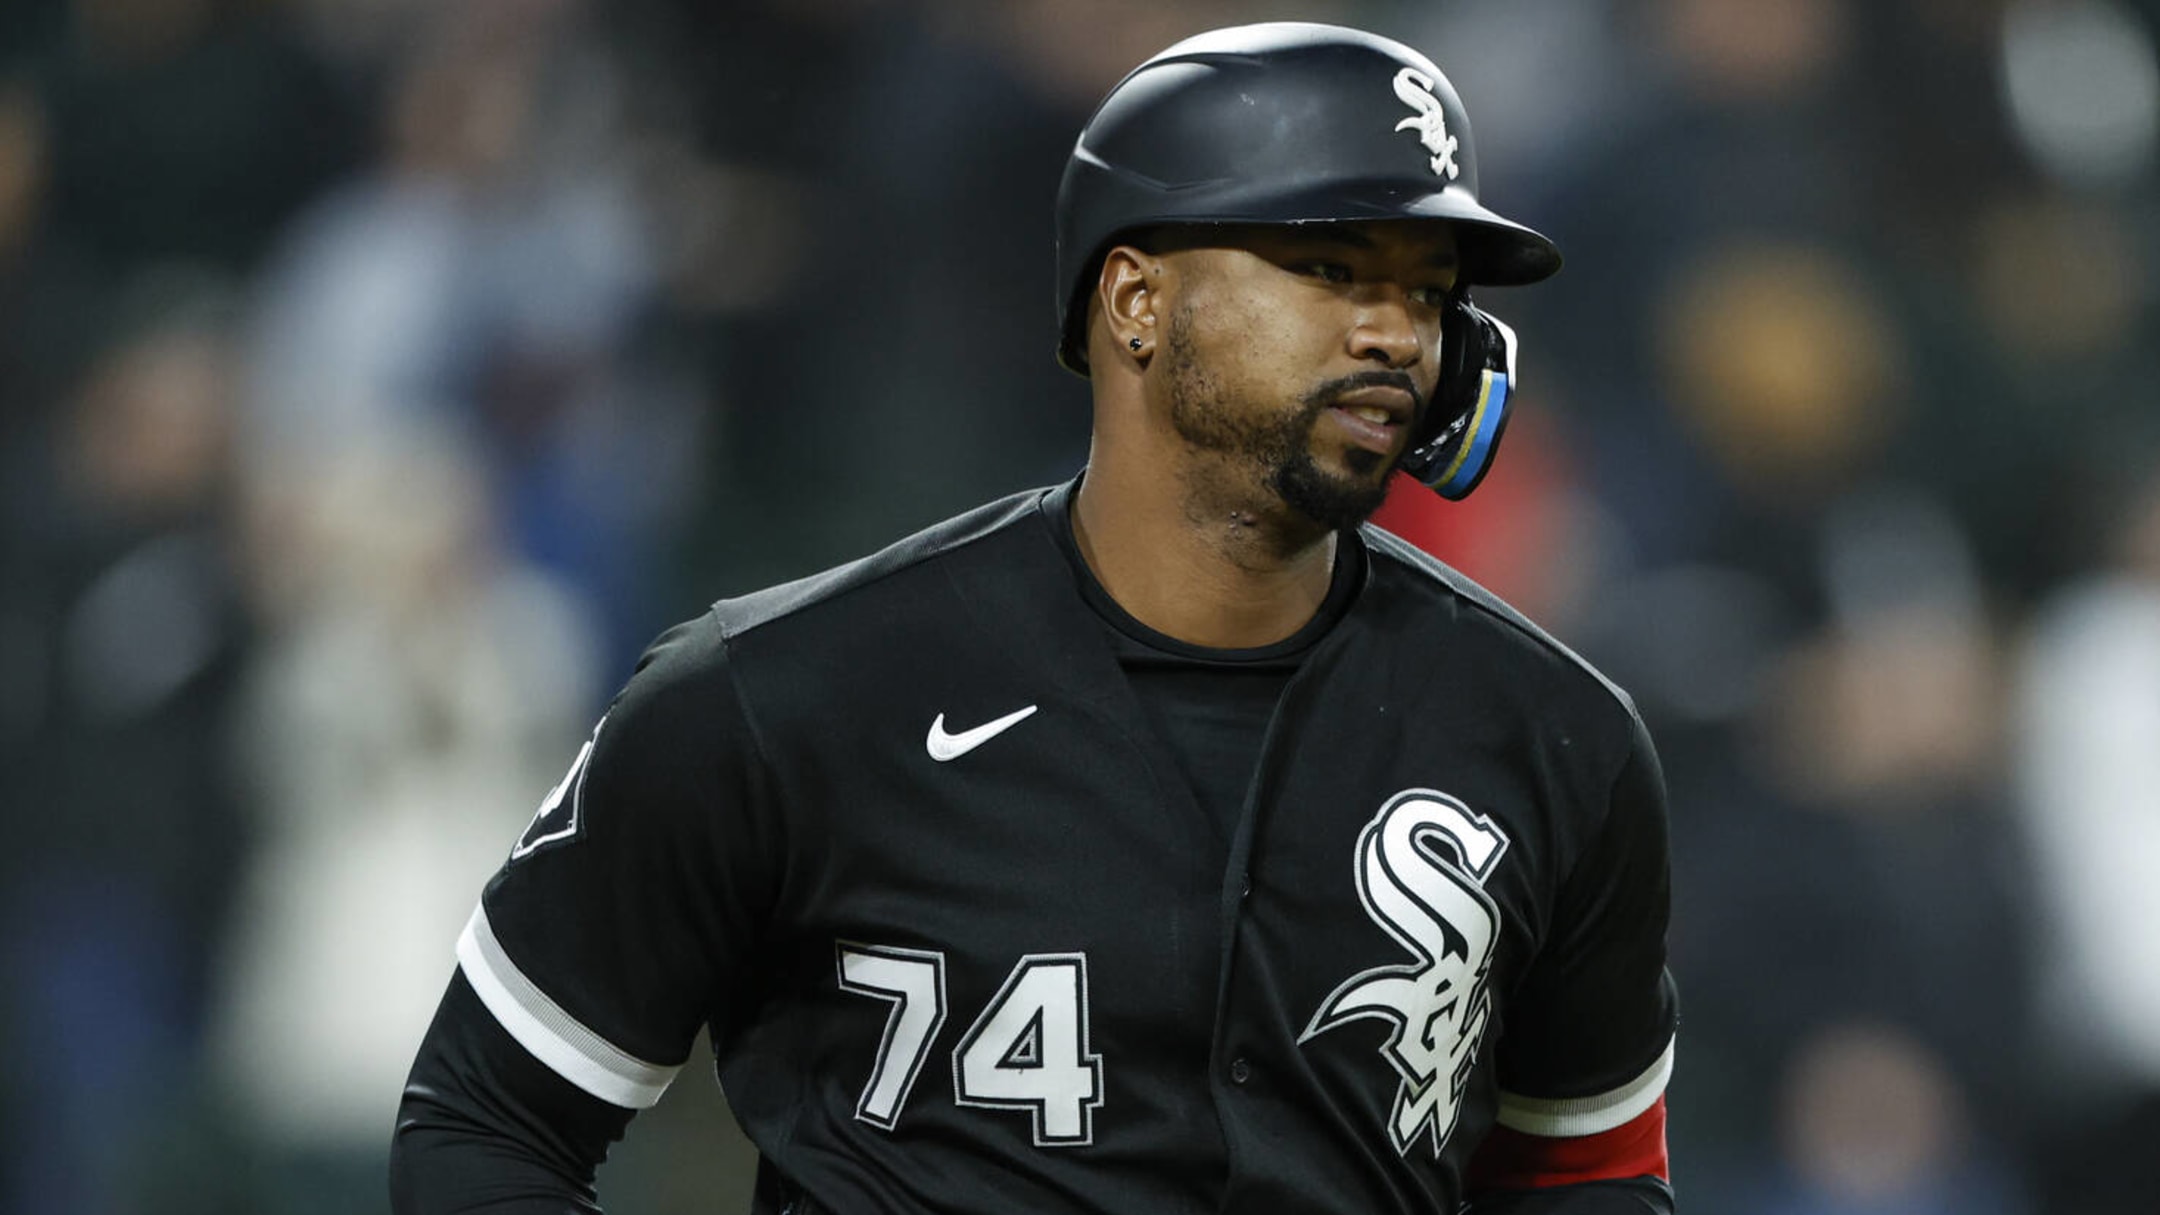 Eloy Jimenez Reacts to Making His 2021 Season Debut After Injury & Months  of Rehab